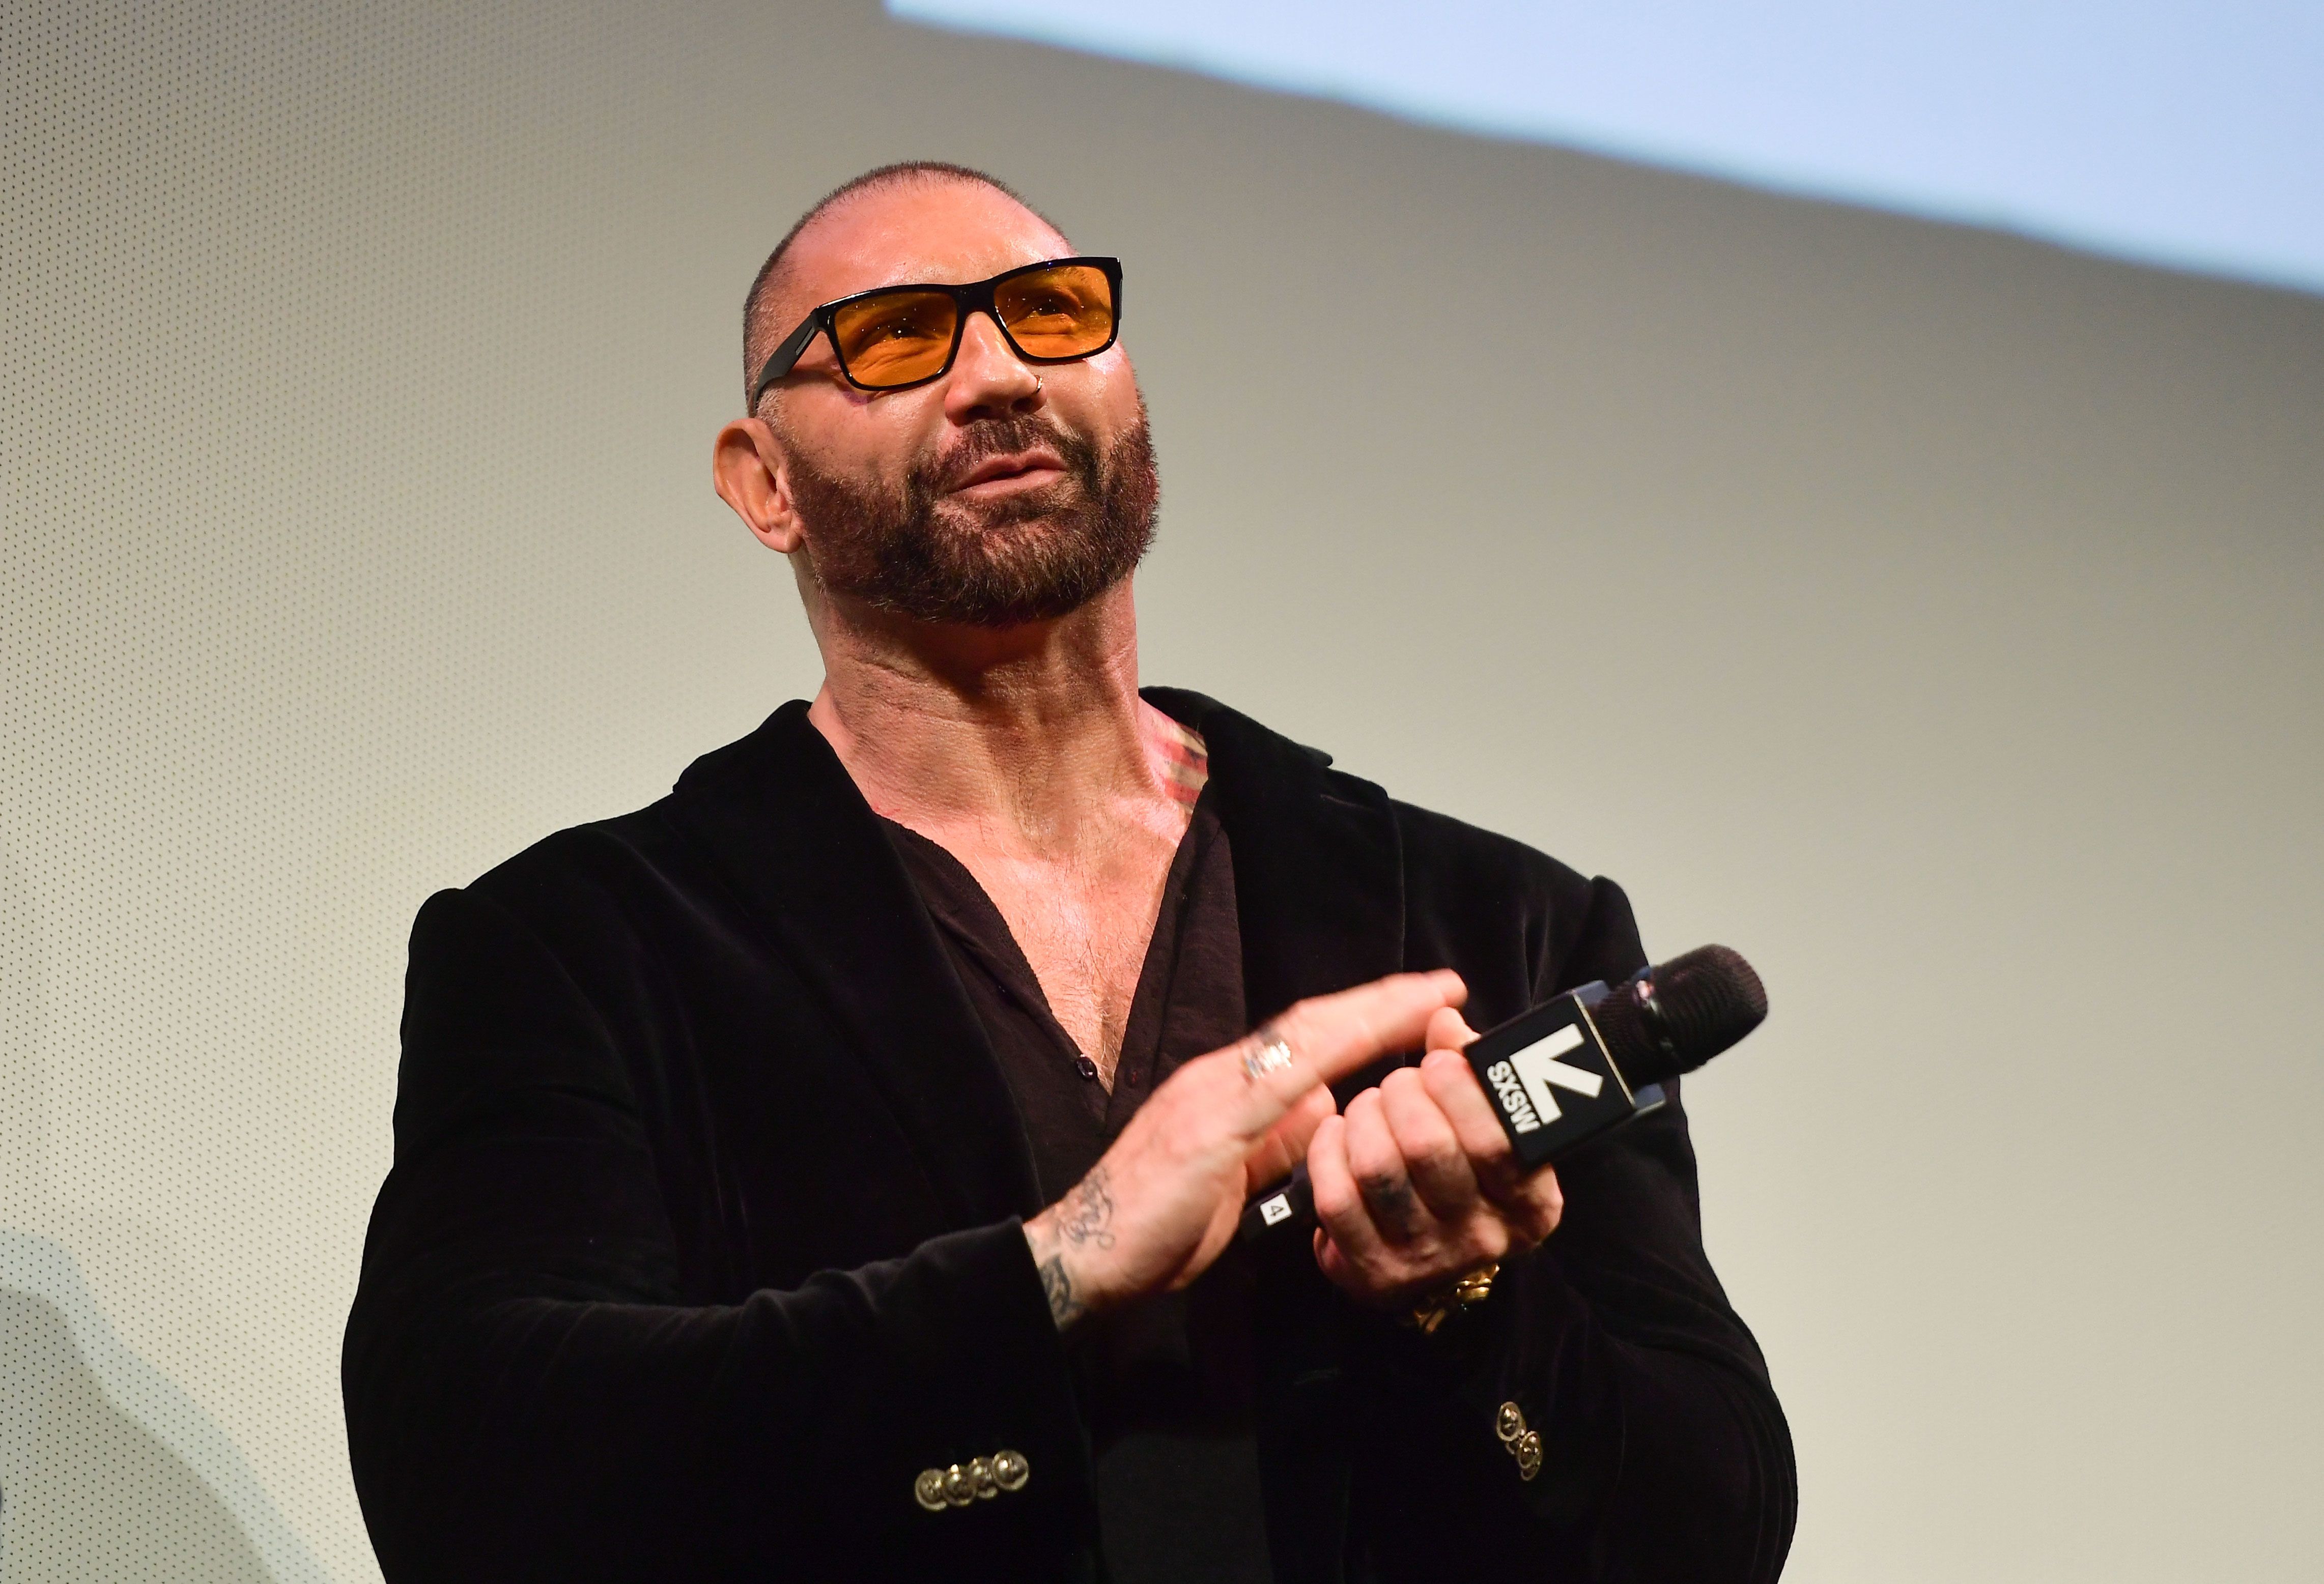 Dave Bautista : Dave Bautista Wikipedia : Endgame, and will reprise the ...